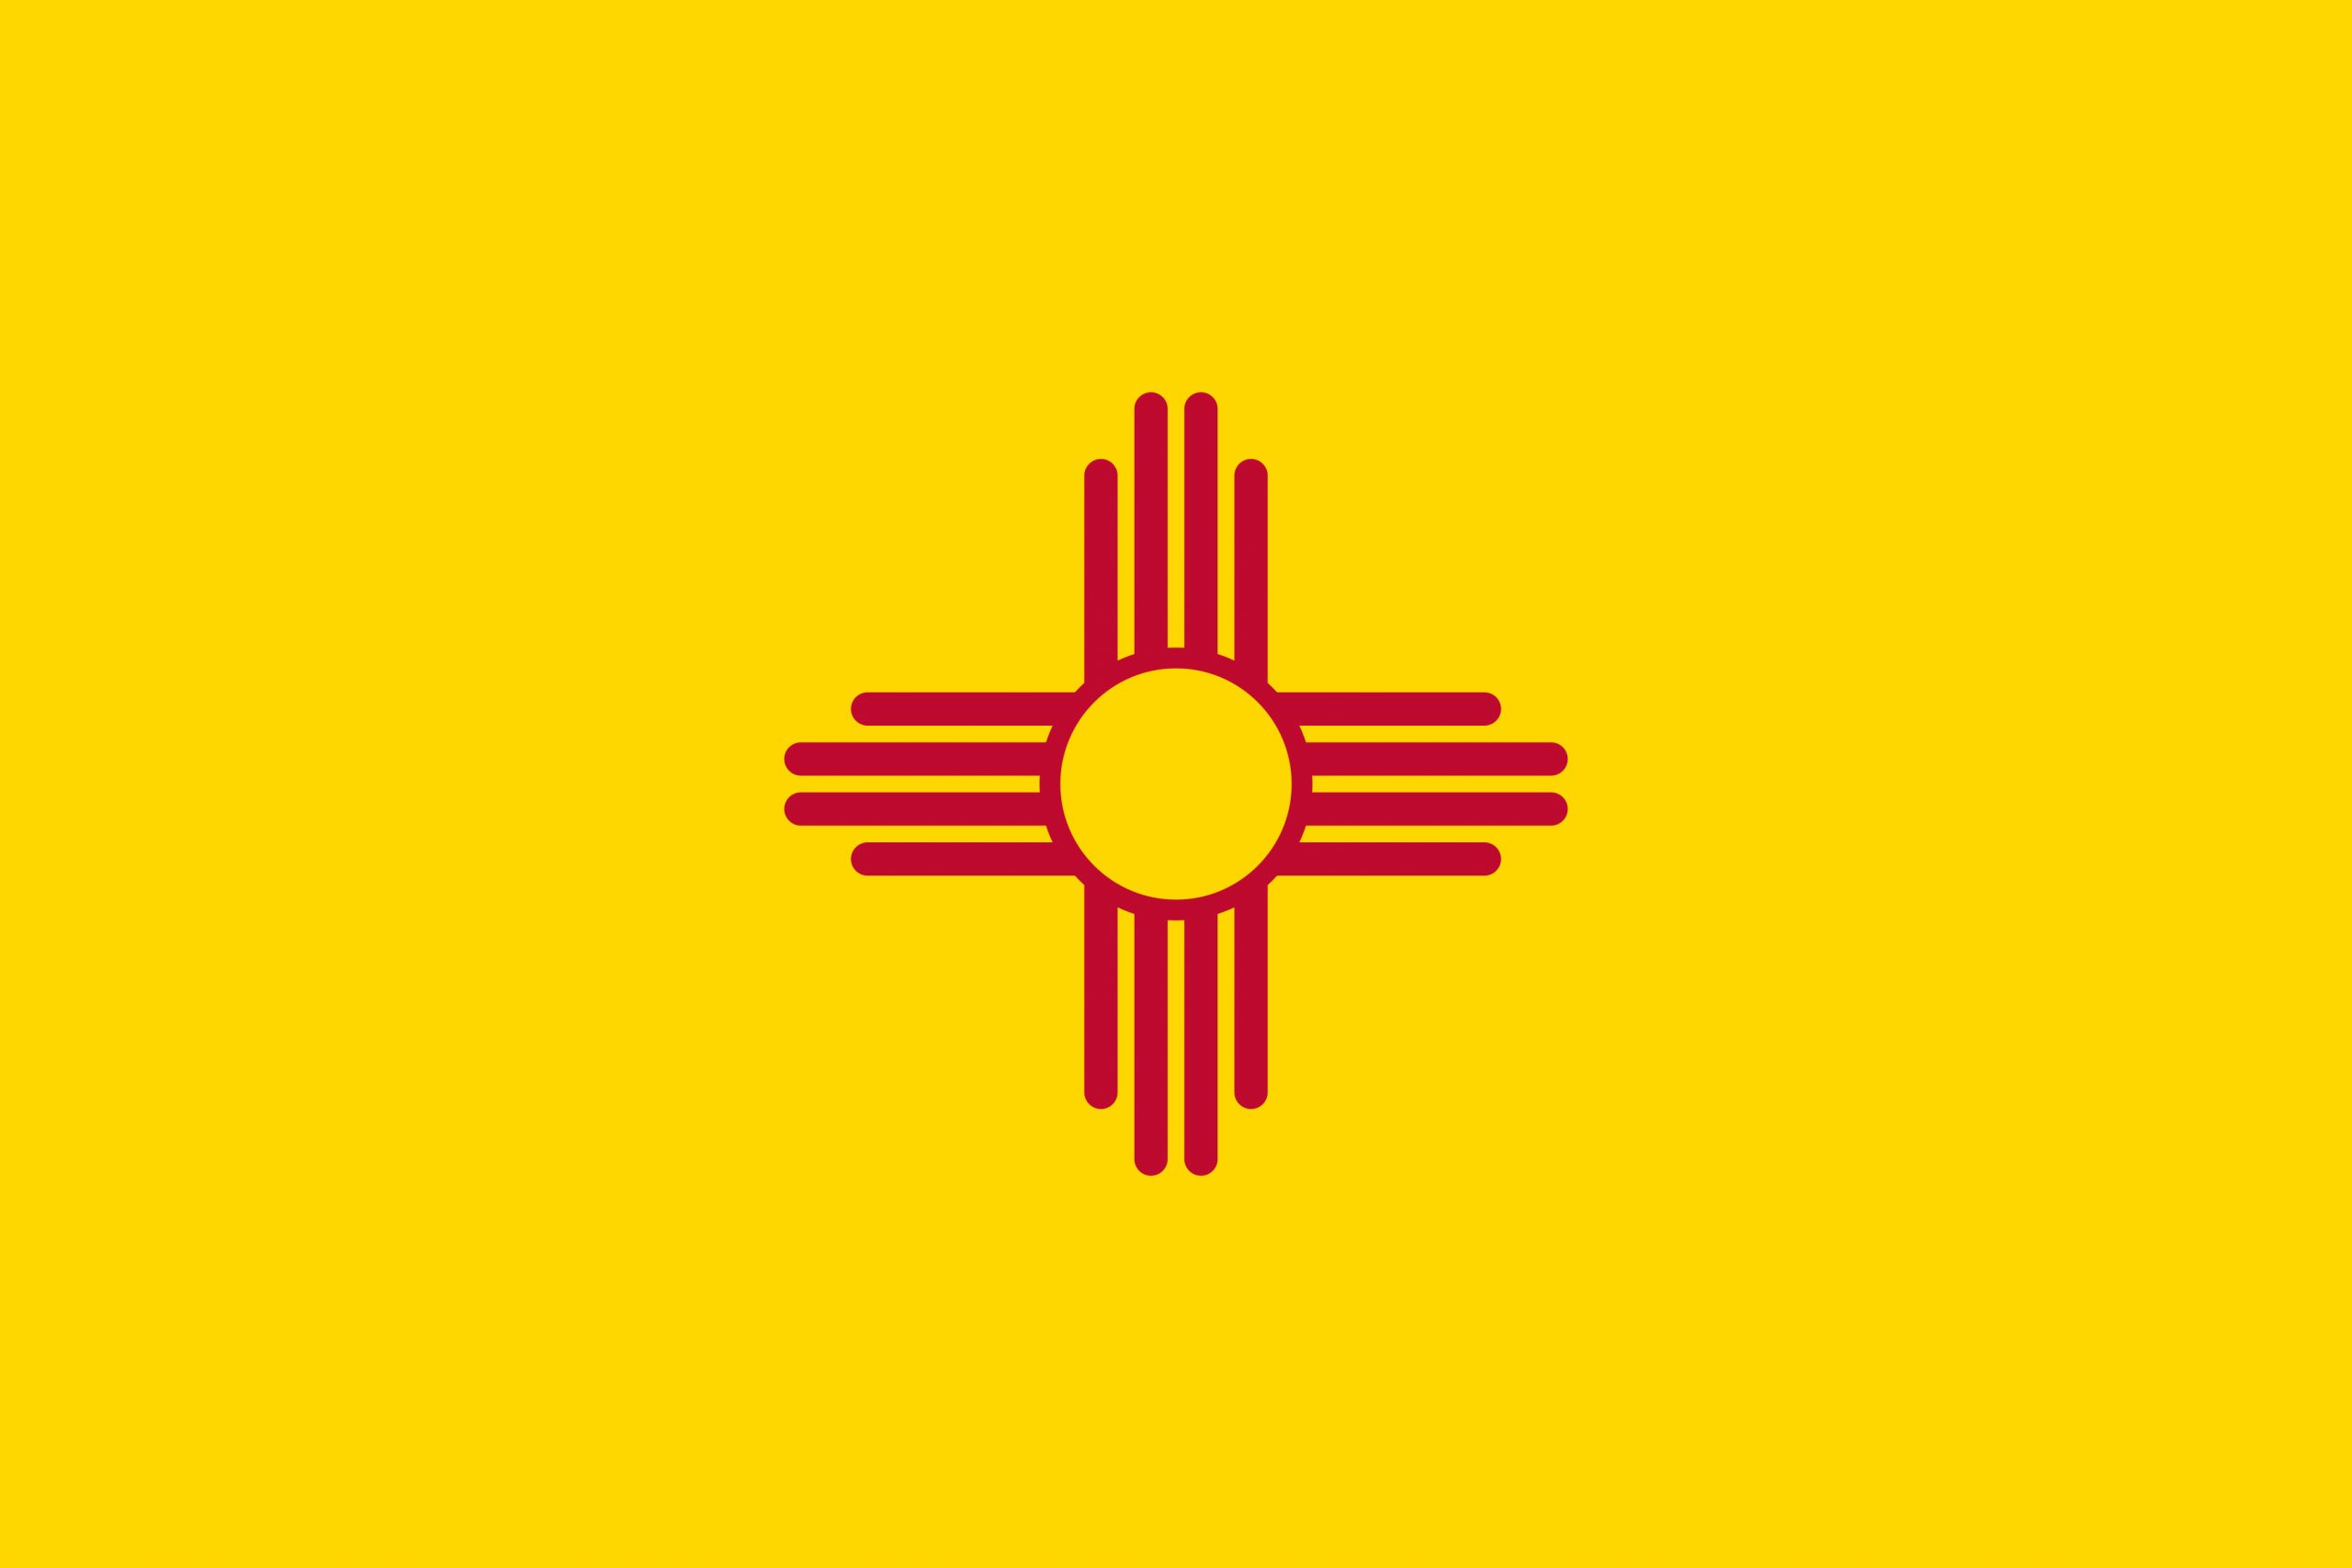 New Mexico State Flag Colors - HTML HEX, RGB, HSL, CMYK, HWB and NCOL